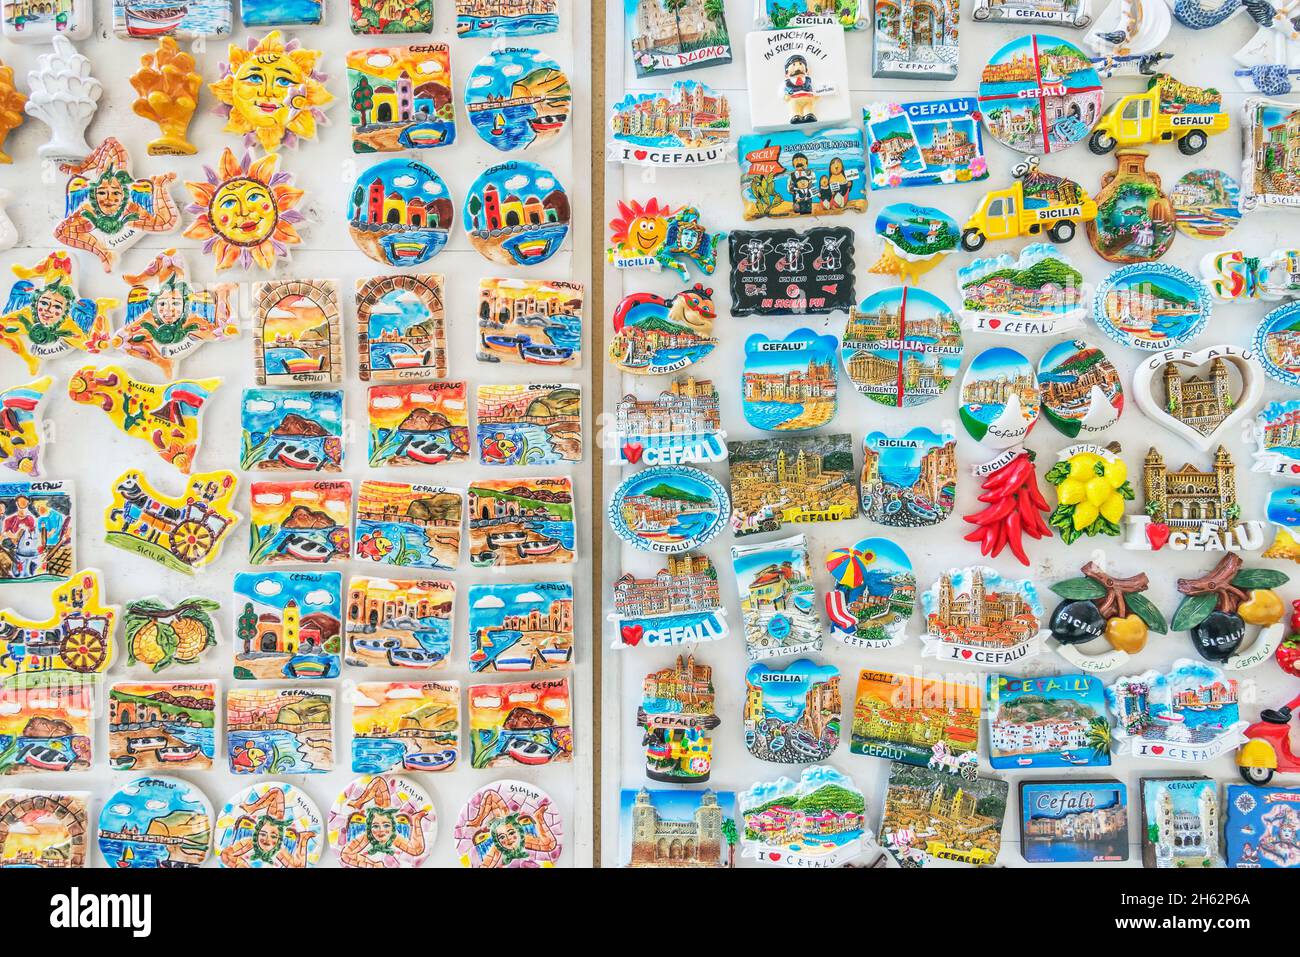 souvenirs for sale,cefalu,sicily,italy Stock Photo